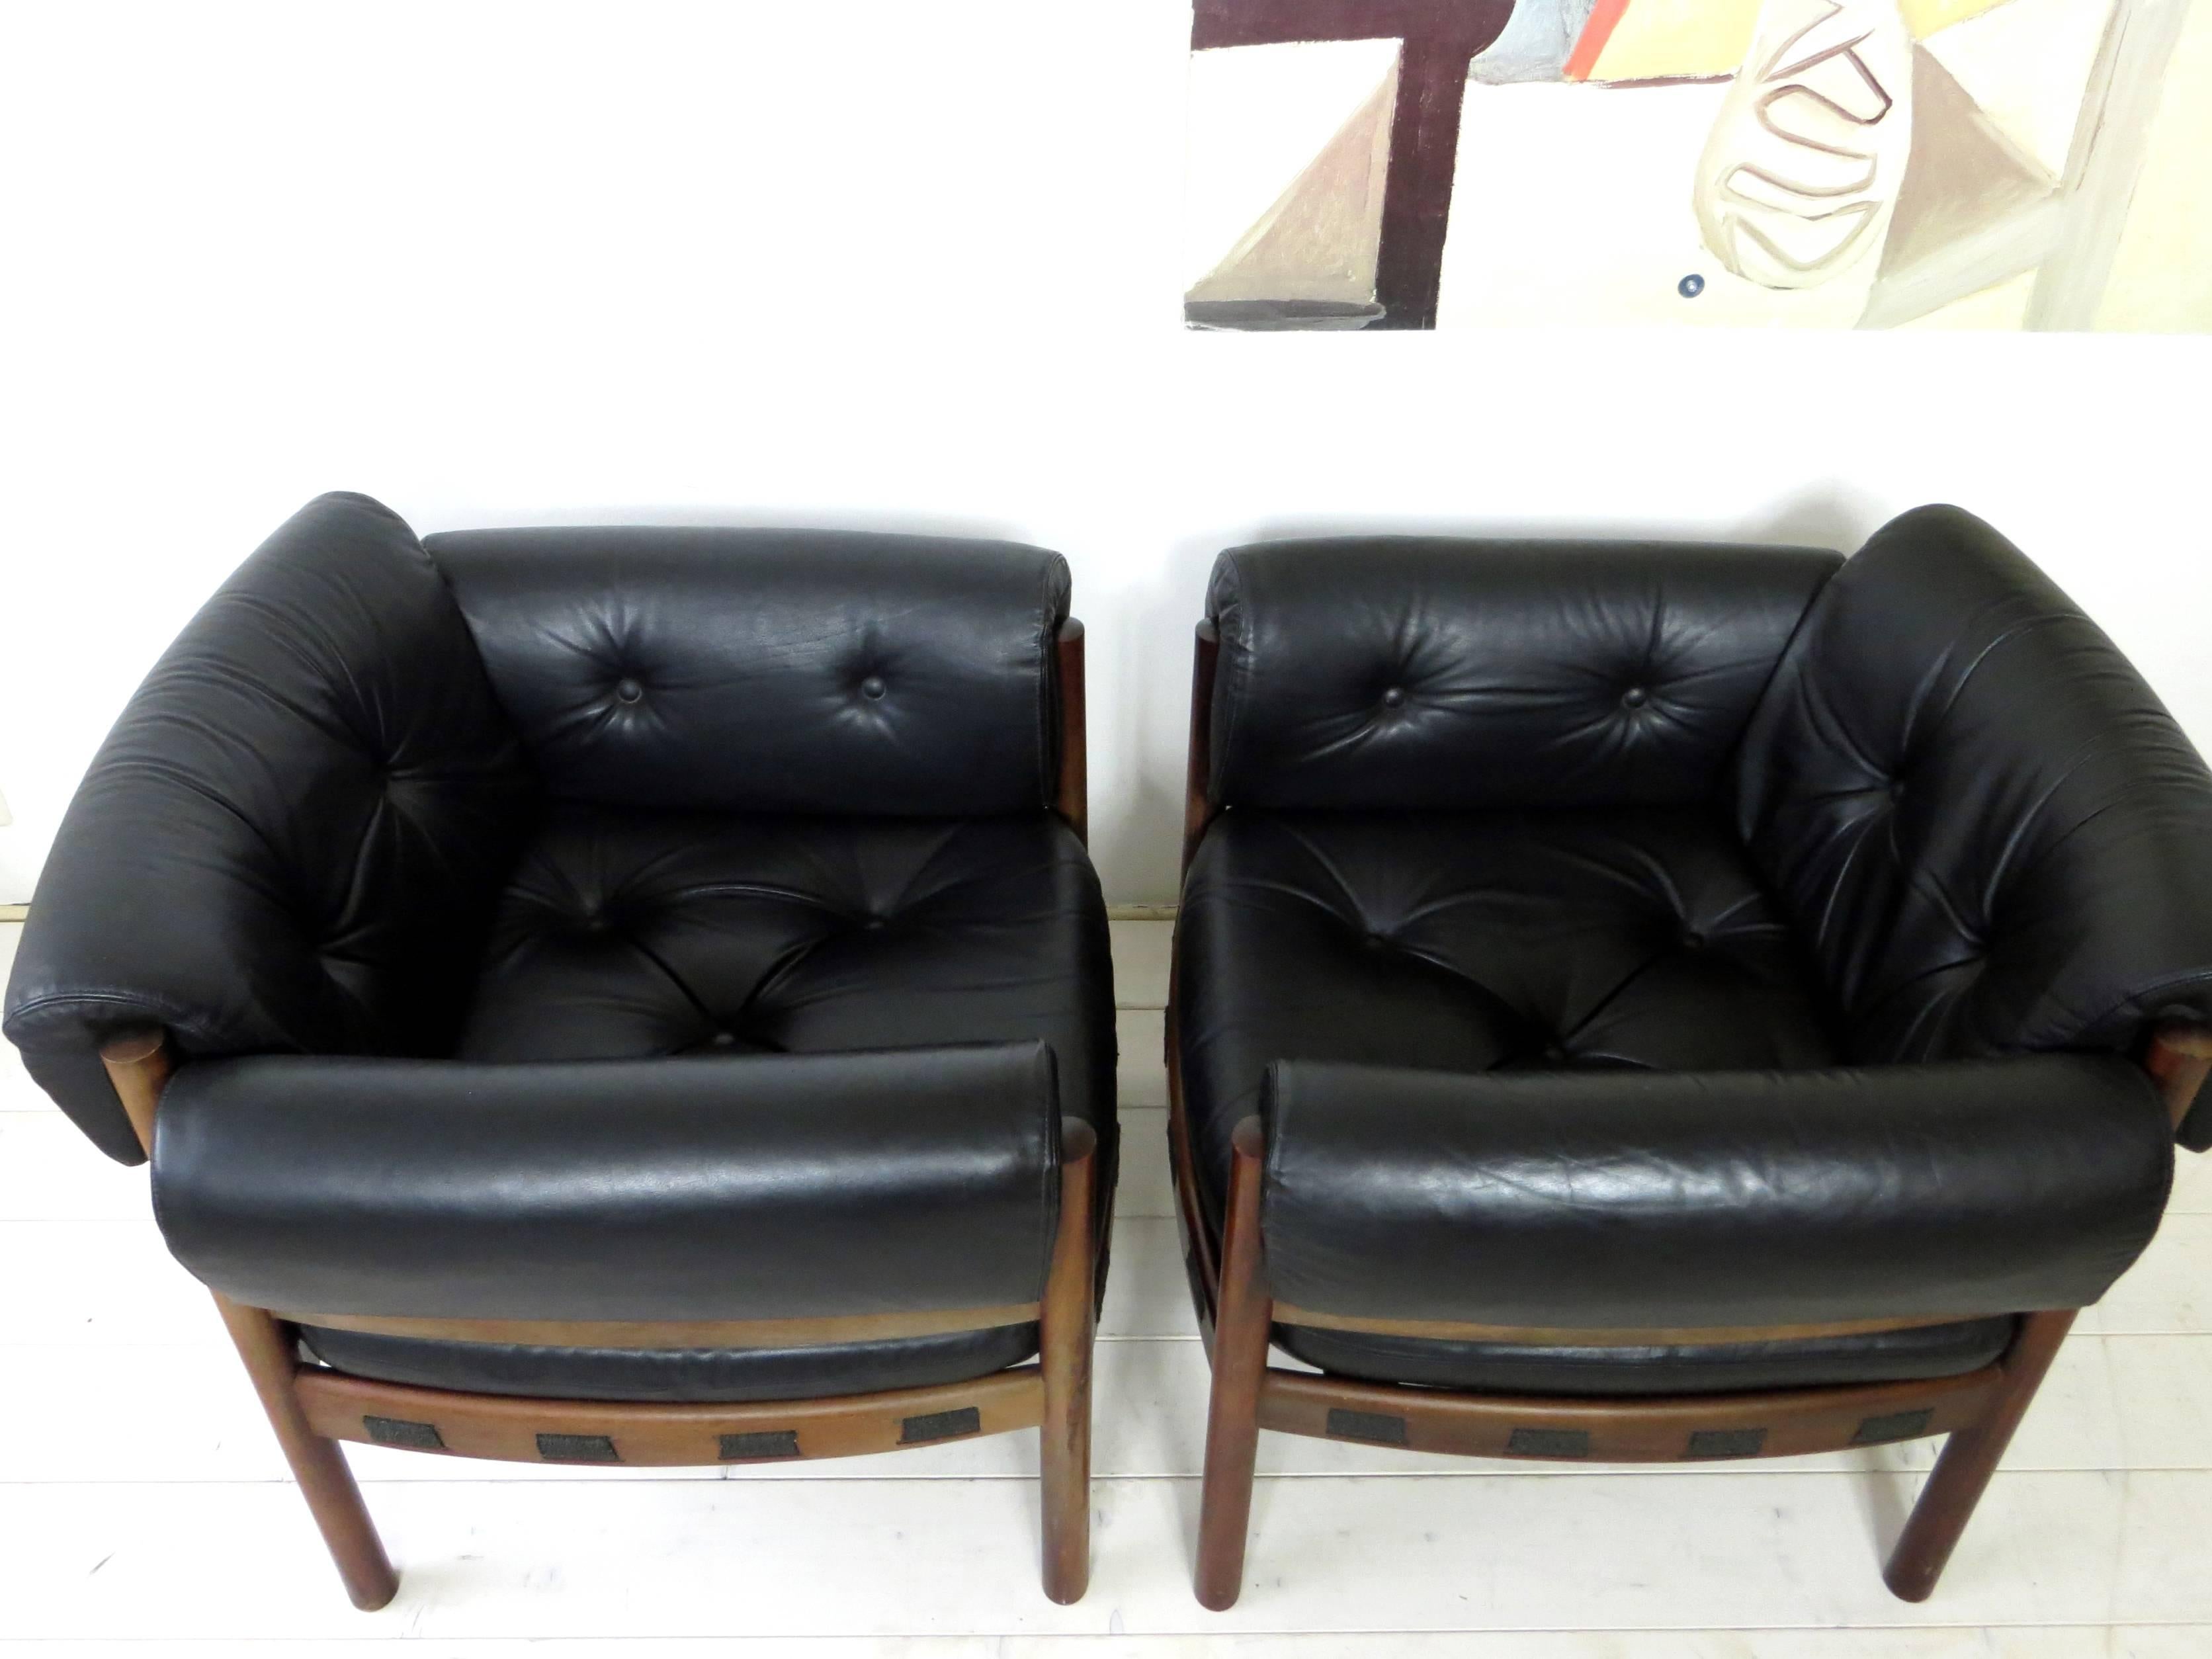 20th Century Pair of Arne Norell Rosewood Lounge Chairs for Coja Sweden in Black Leather